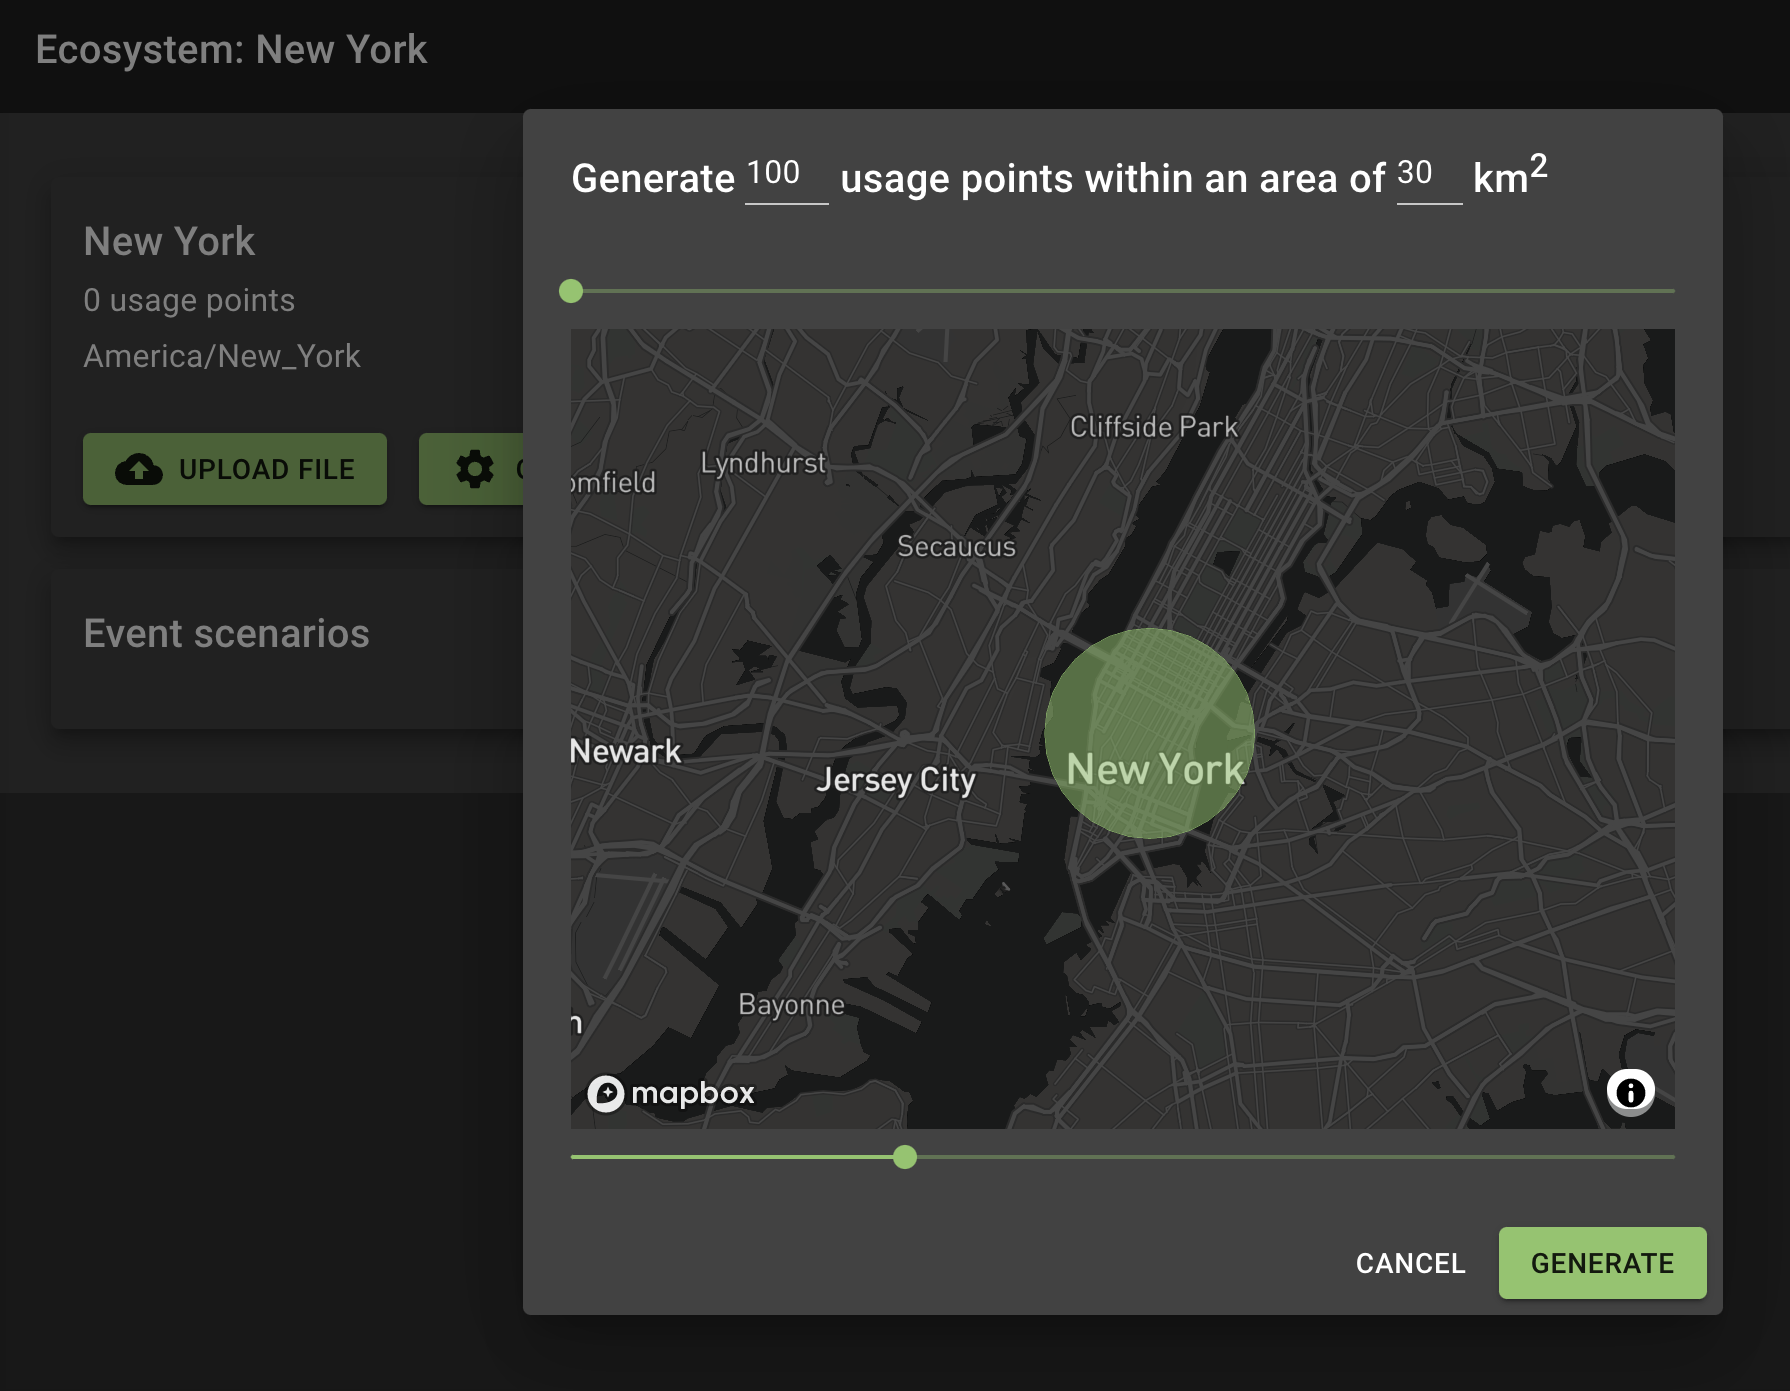 A map displays a green circle around New York, with the area of the circle set to 30 square kilometers.